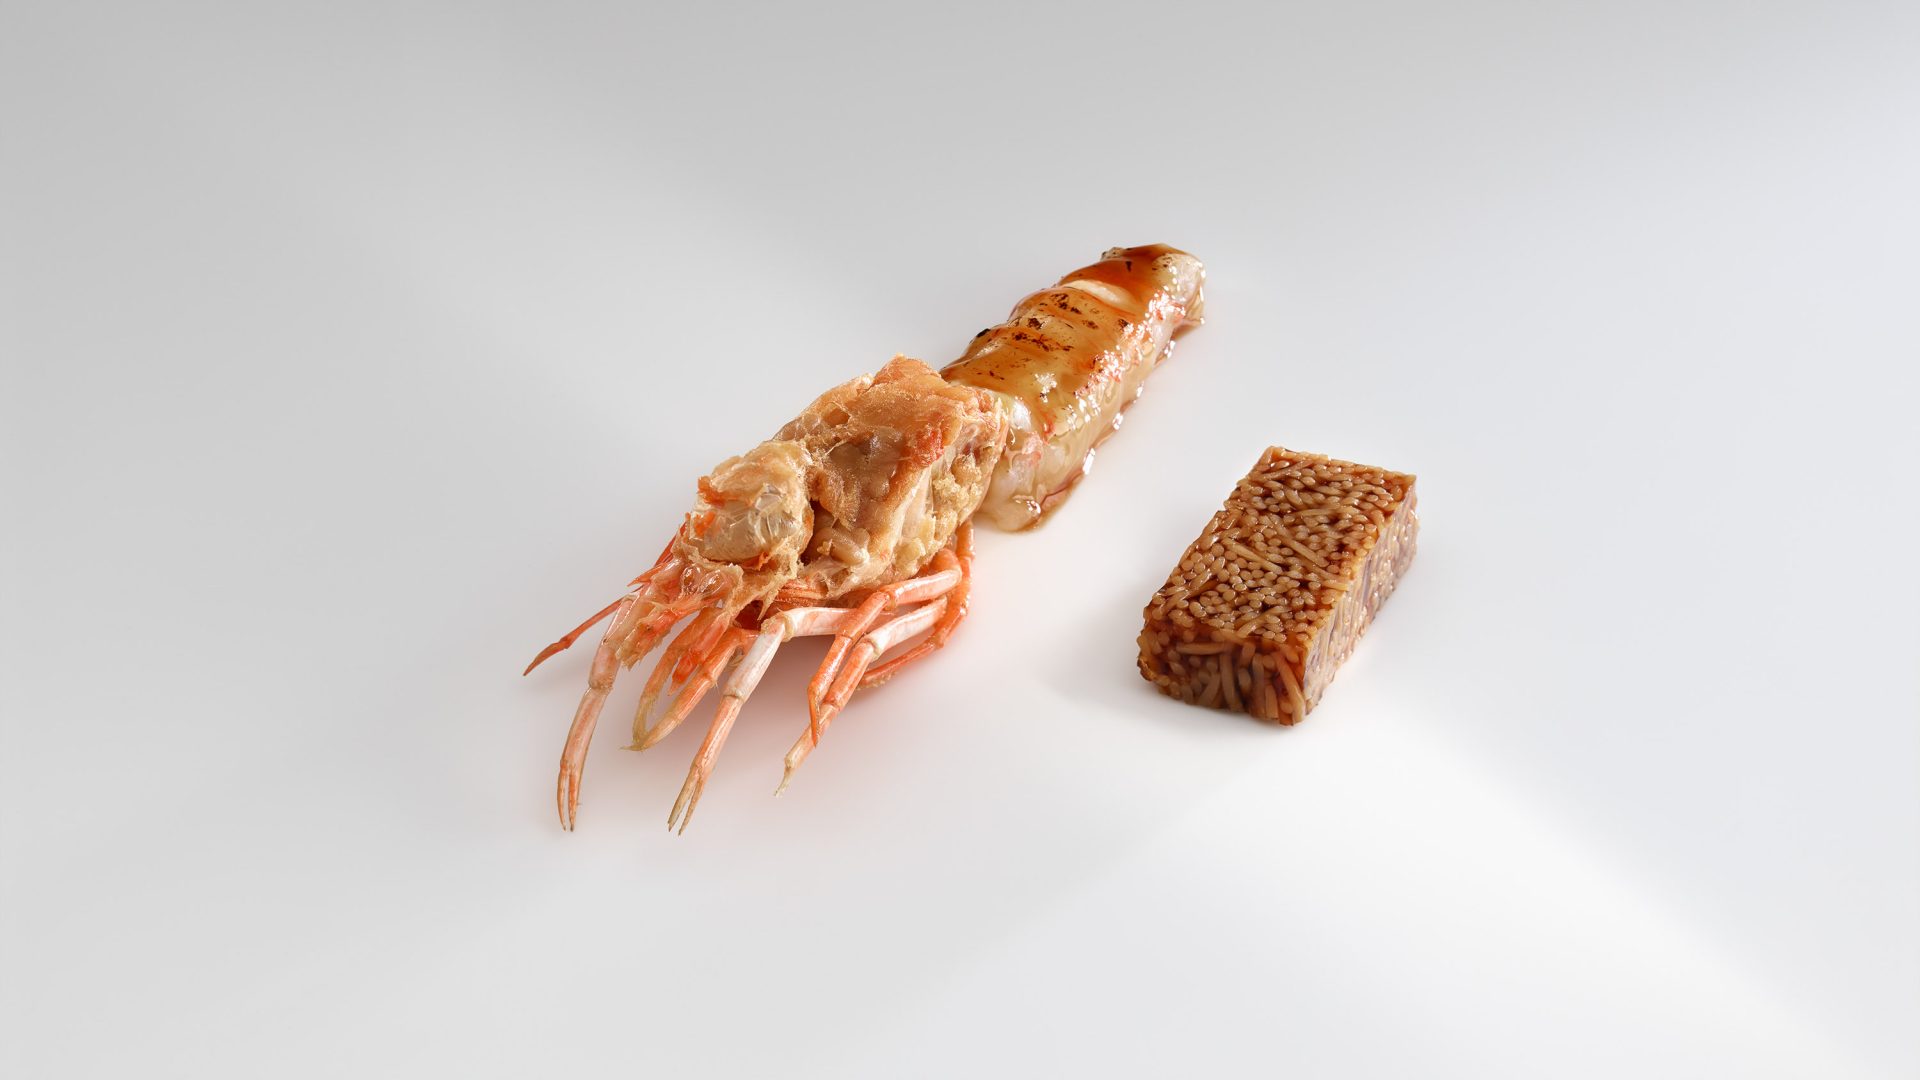 Langoustine in its entirety and also in a small terrine